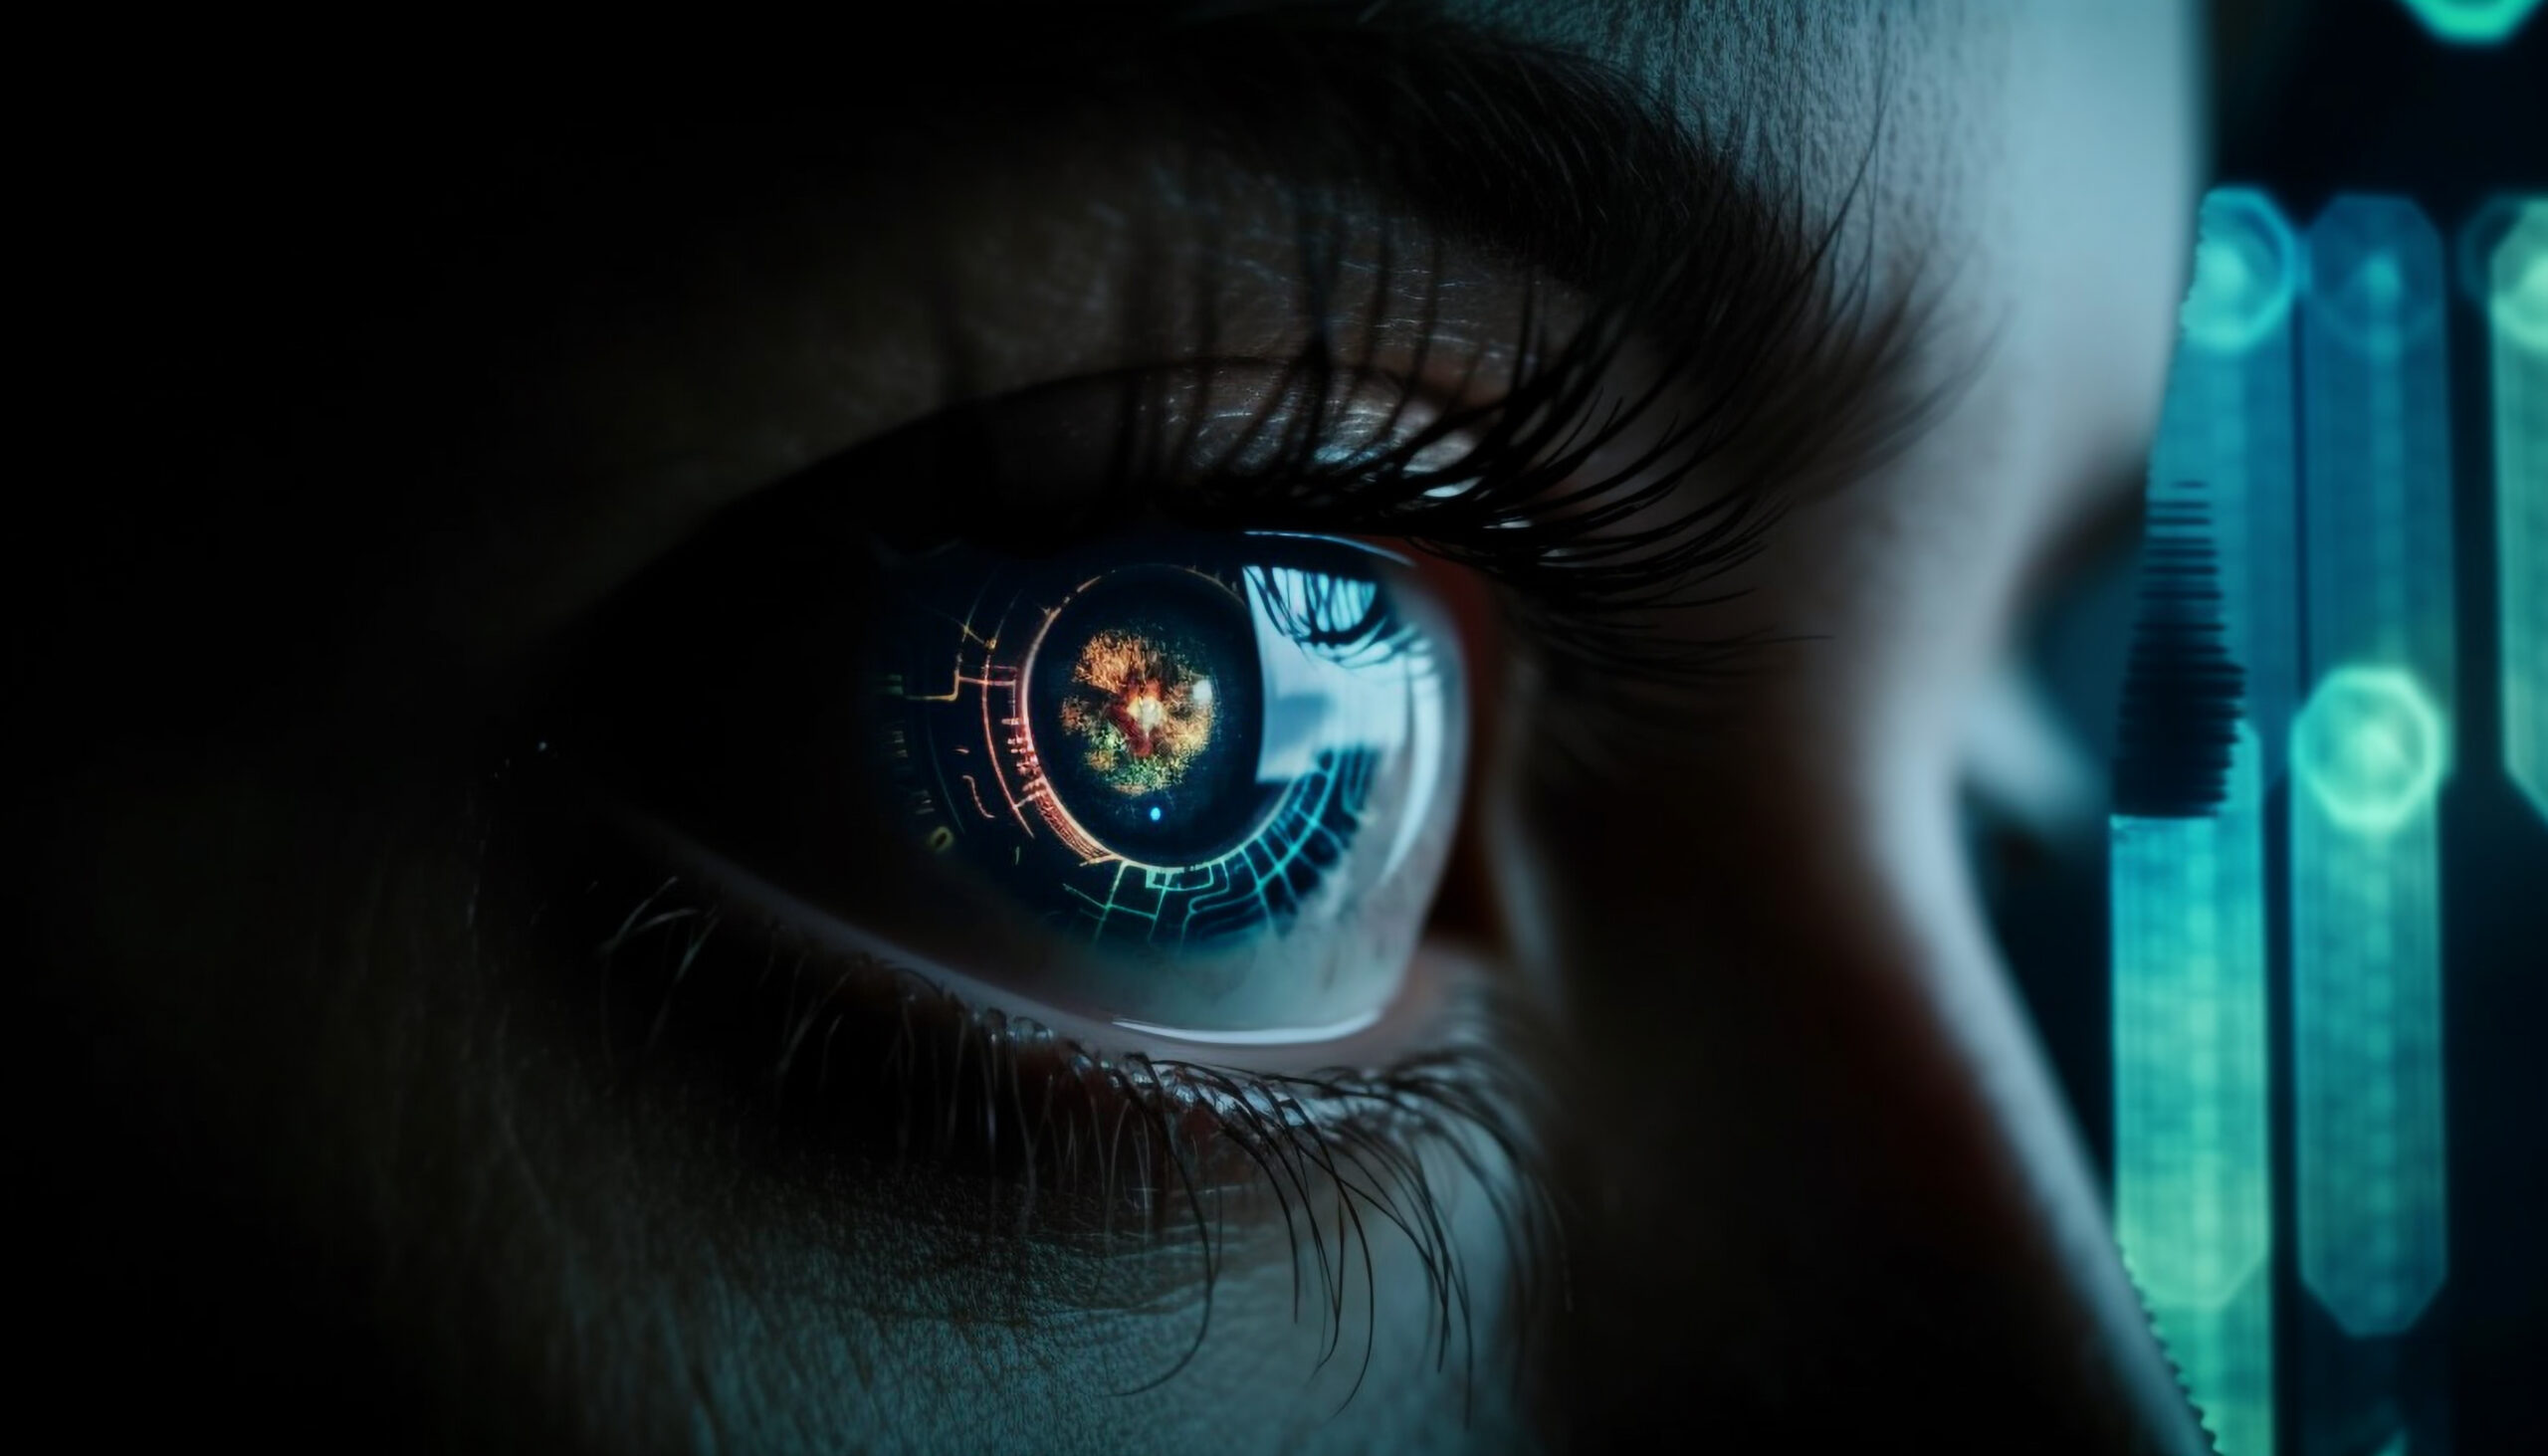 Human eye watching futuristic security system data generated by artificial intelligence